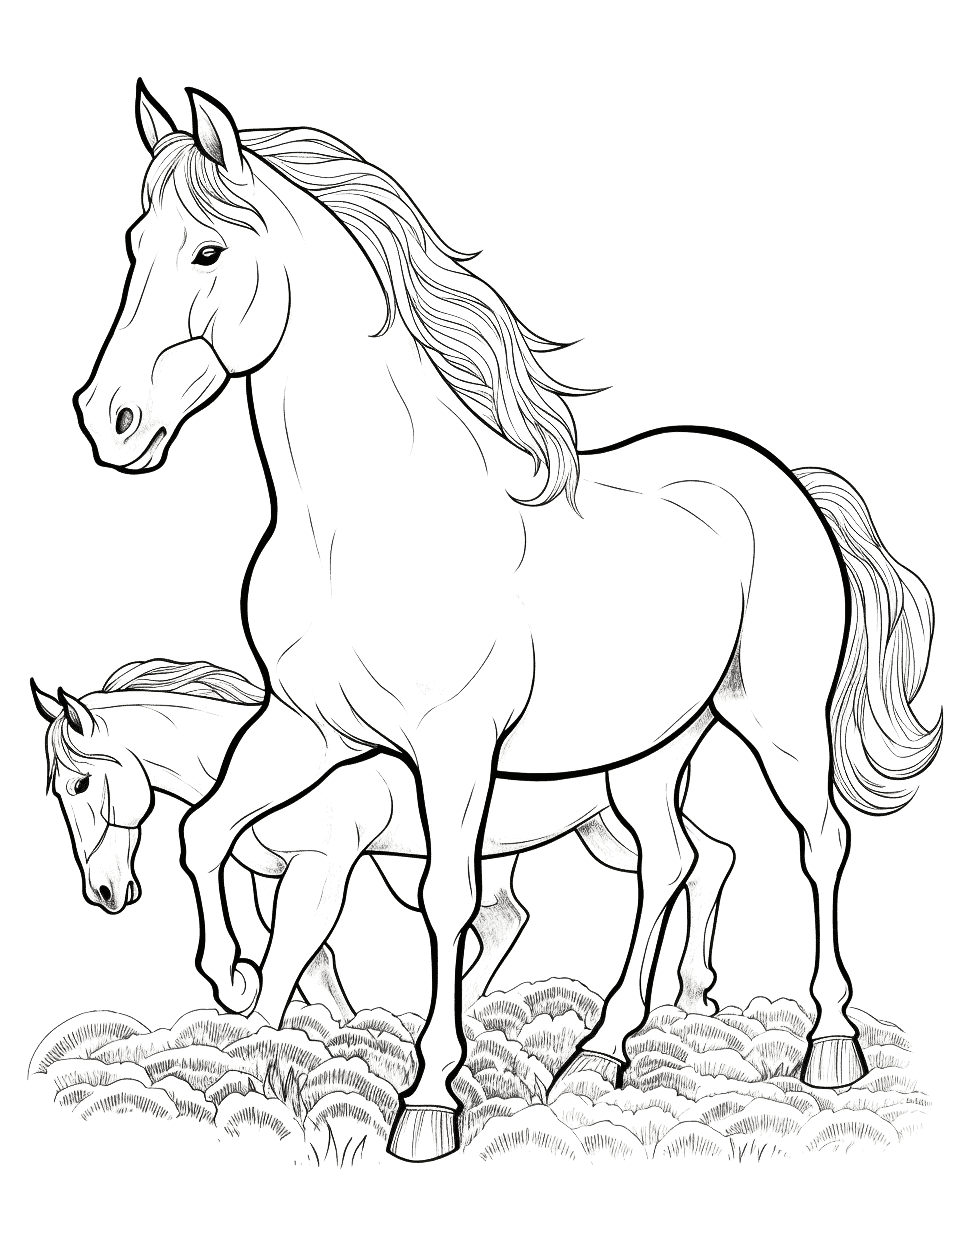 Breyer Horse Fantasy Coloring Page - Two Breyer model horses in a fantasy pasture, playing together.